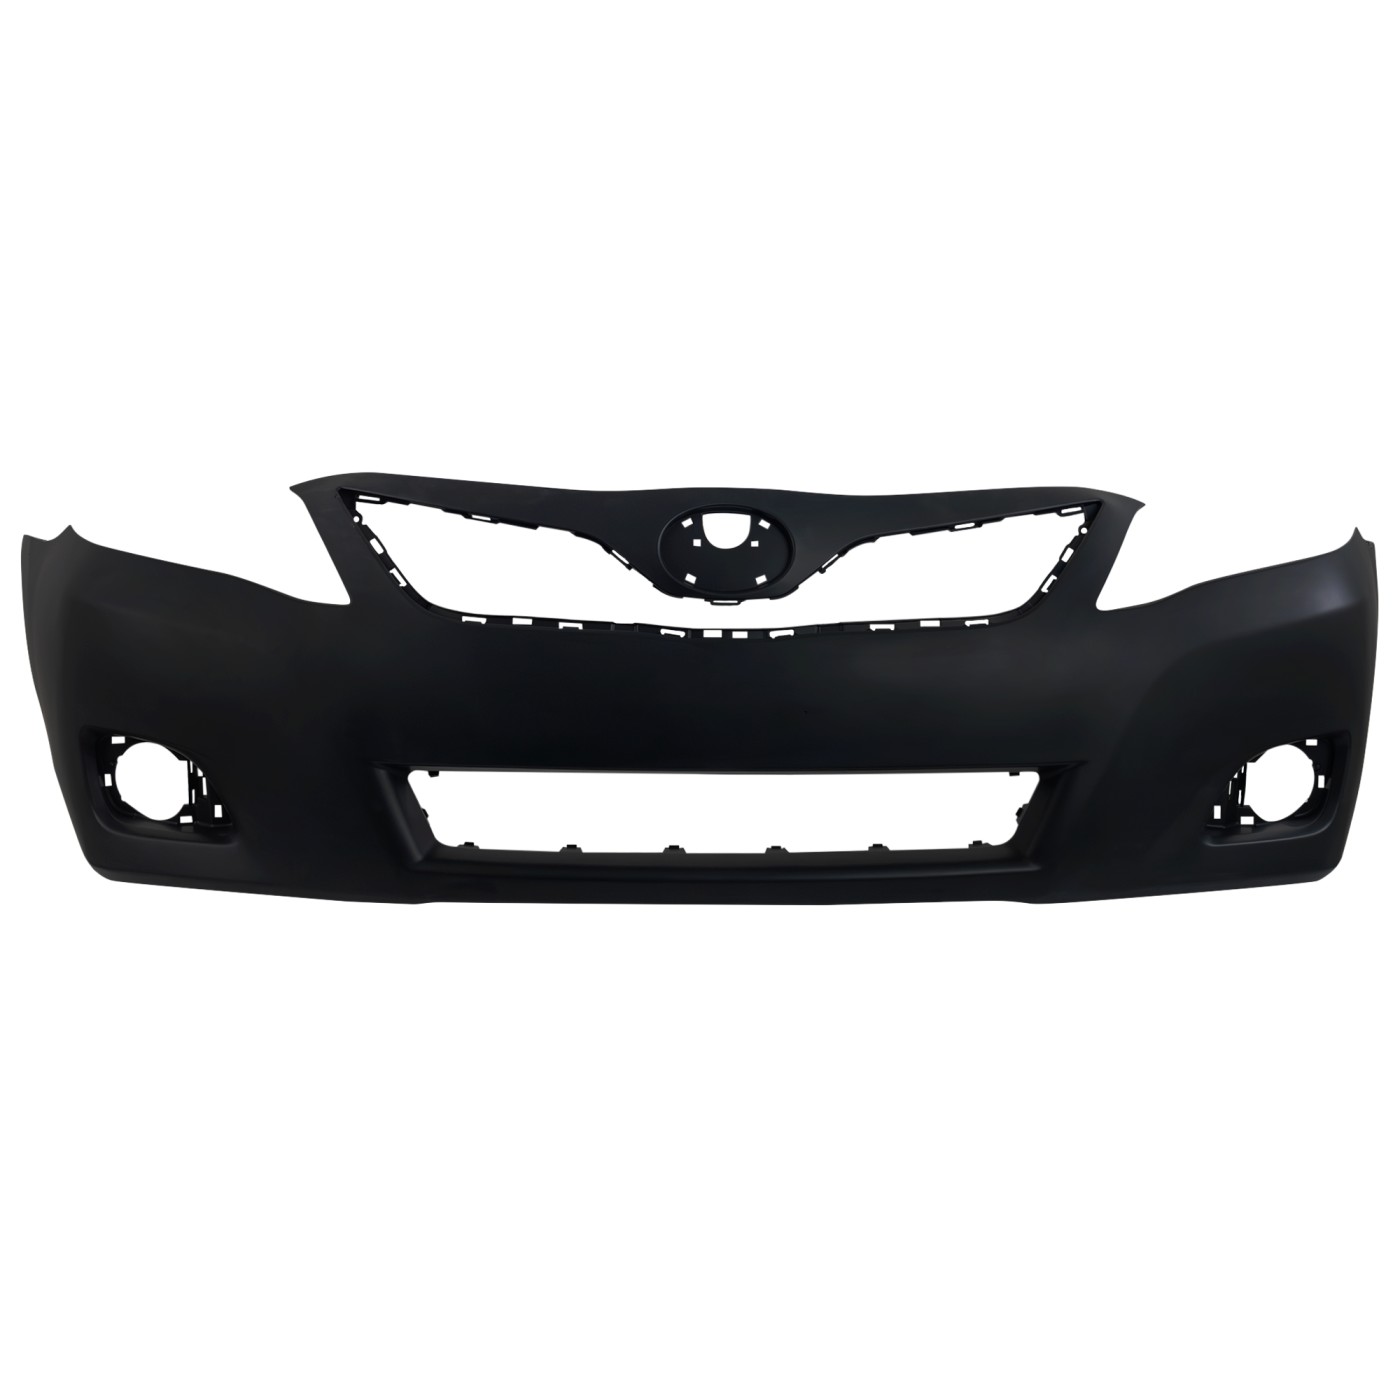 Bumper Cover For 2010-2011 Toyota Camry LE XLE Models USA Built Primed